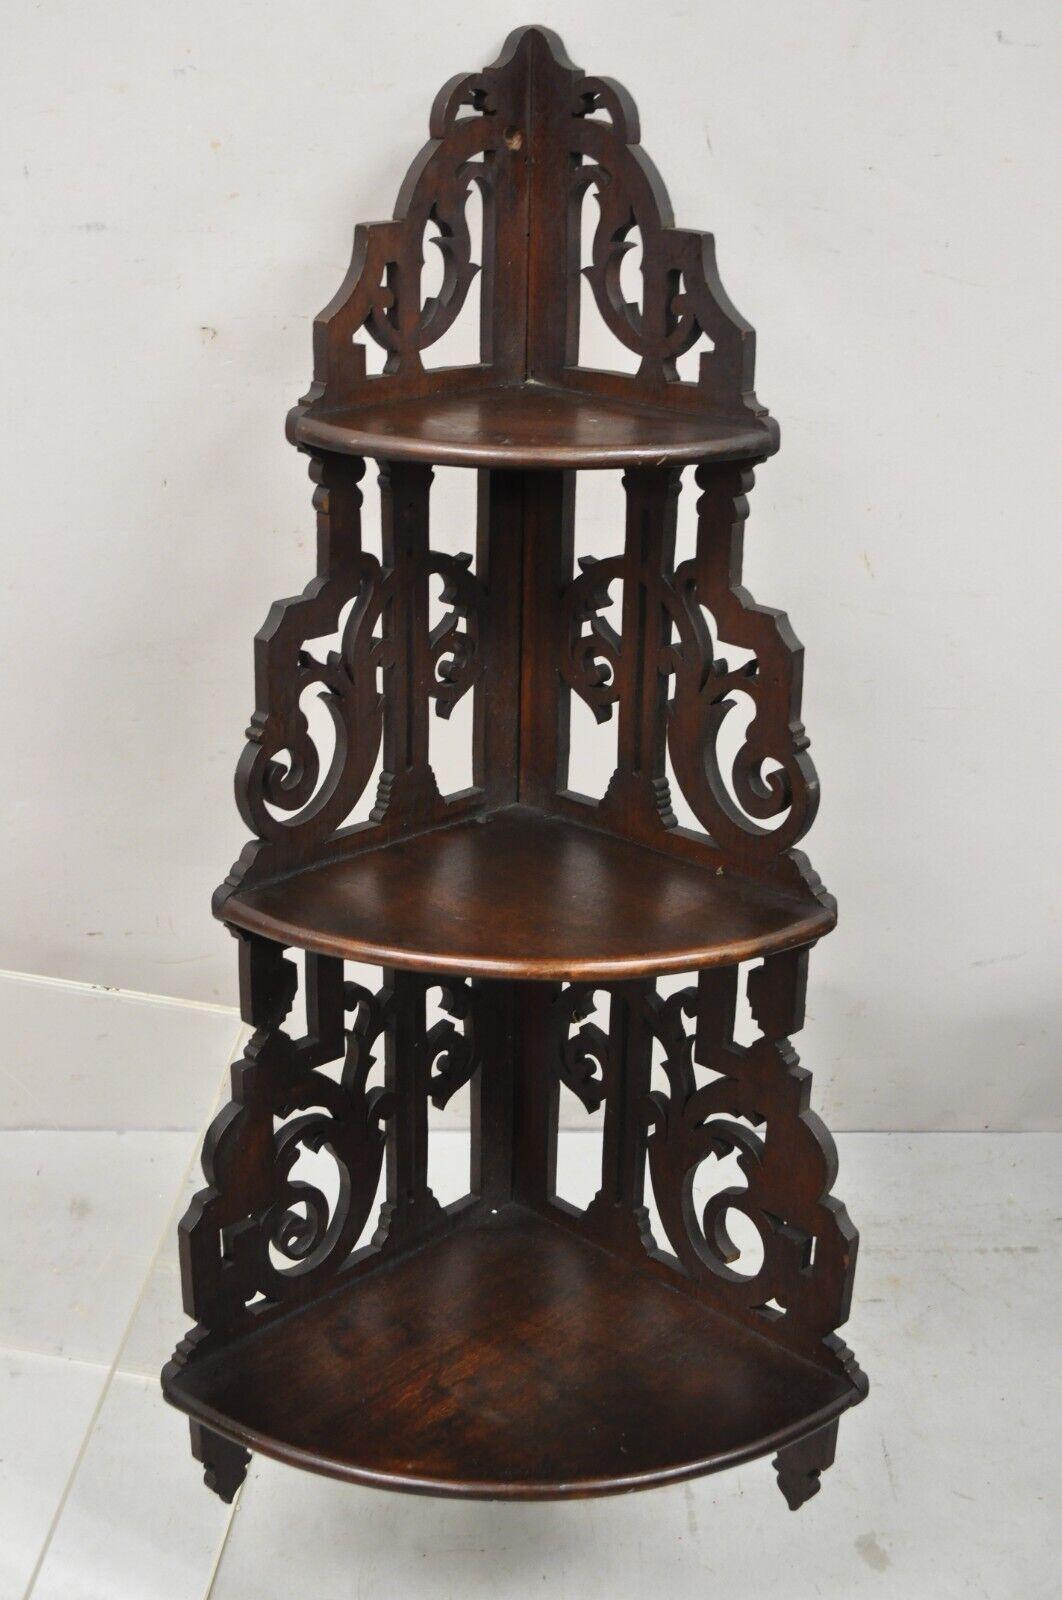 Antique Victorian Walnut 3 Tier Carved Knick Knack Corner Whatnot wall shelf Curio. Circa Early 20th Century. Measurements: 38